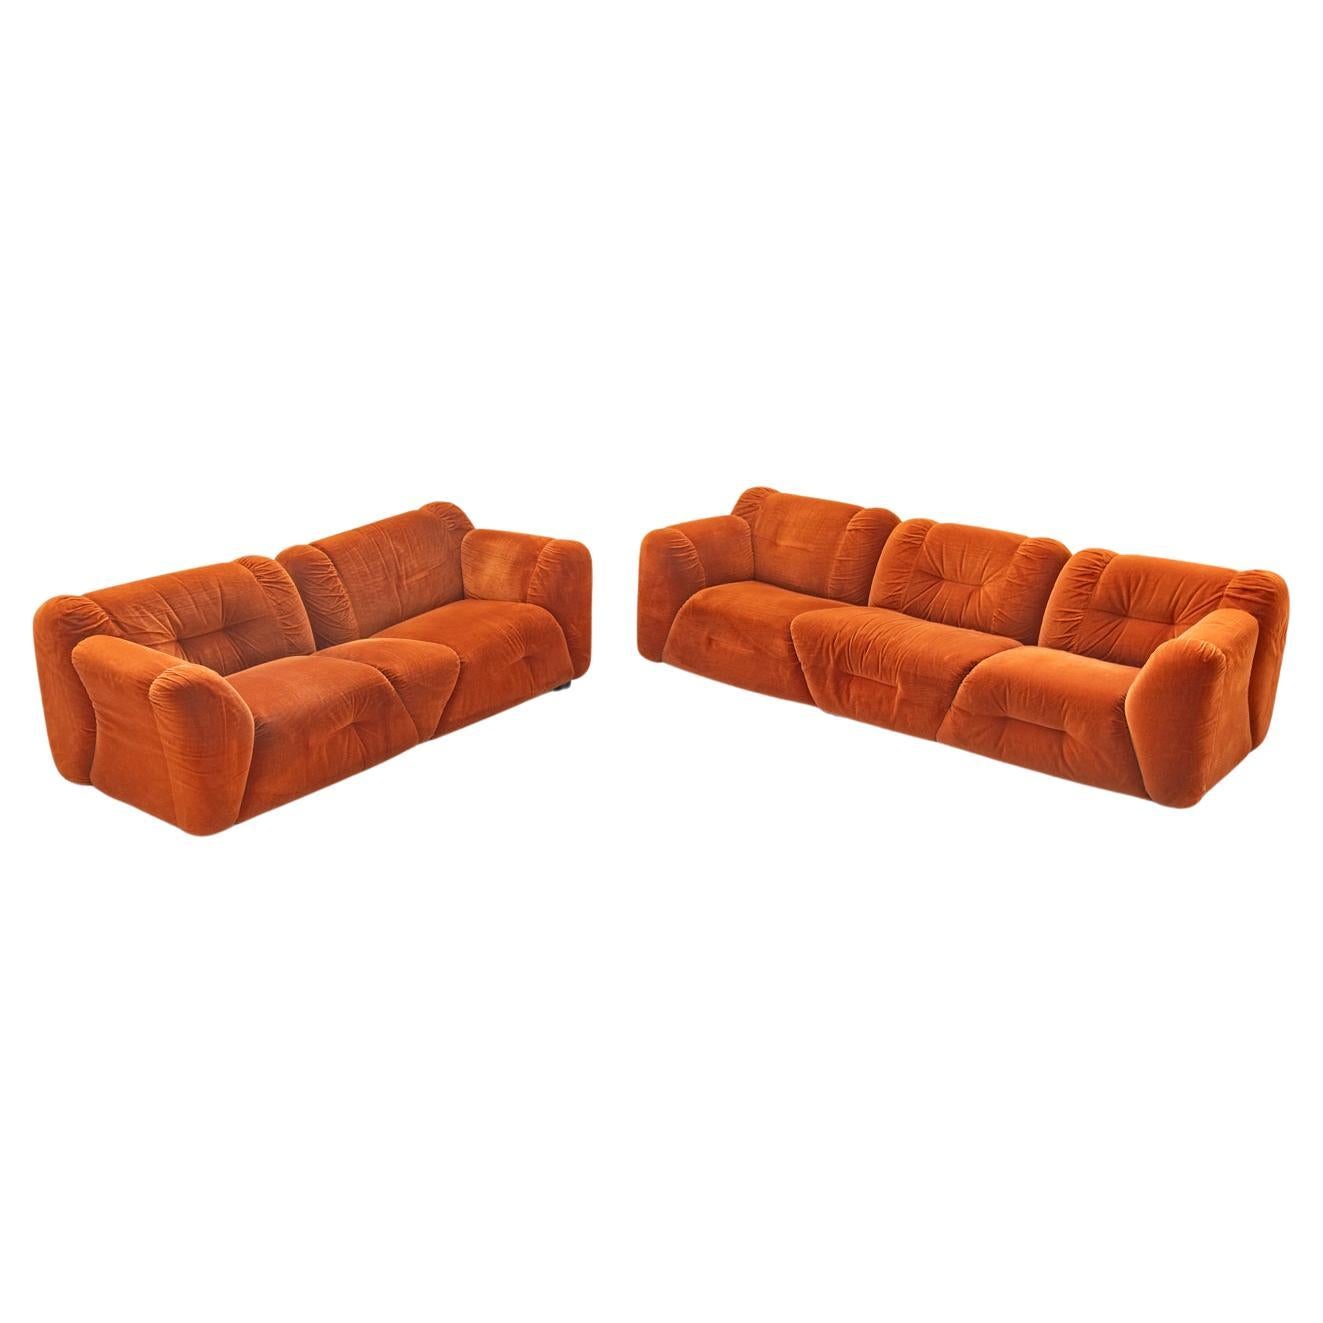 Orange chenille sofas, two and three seater, set of 2, 1970s